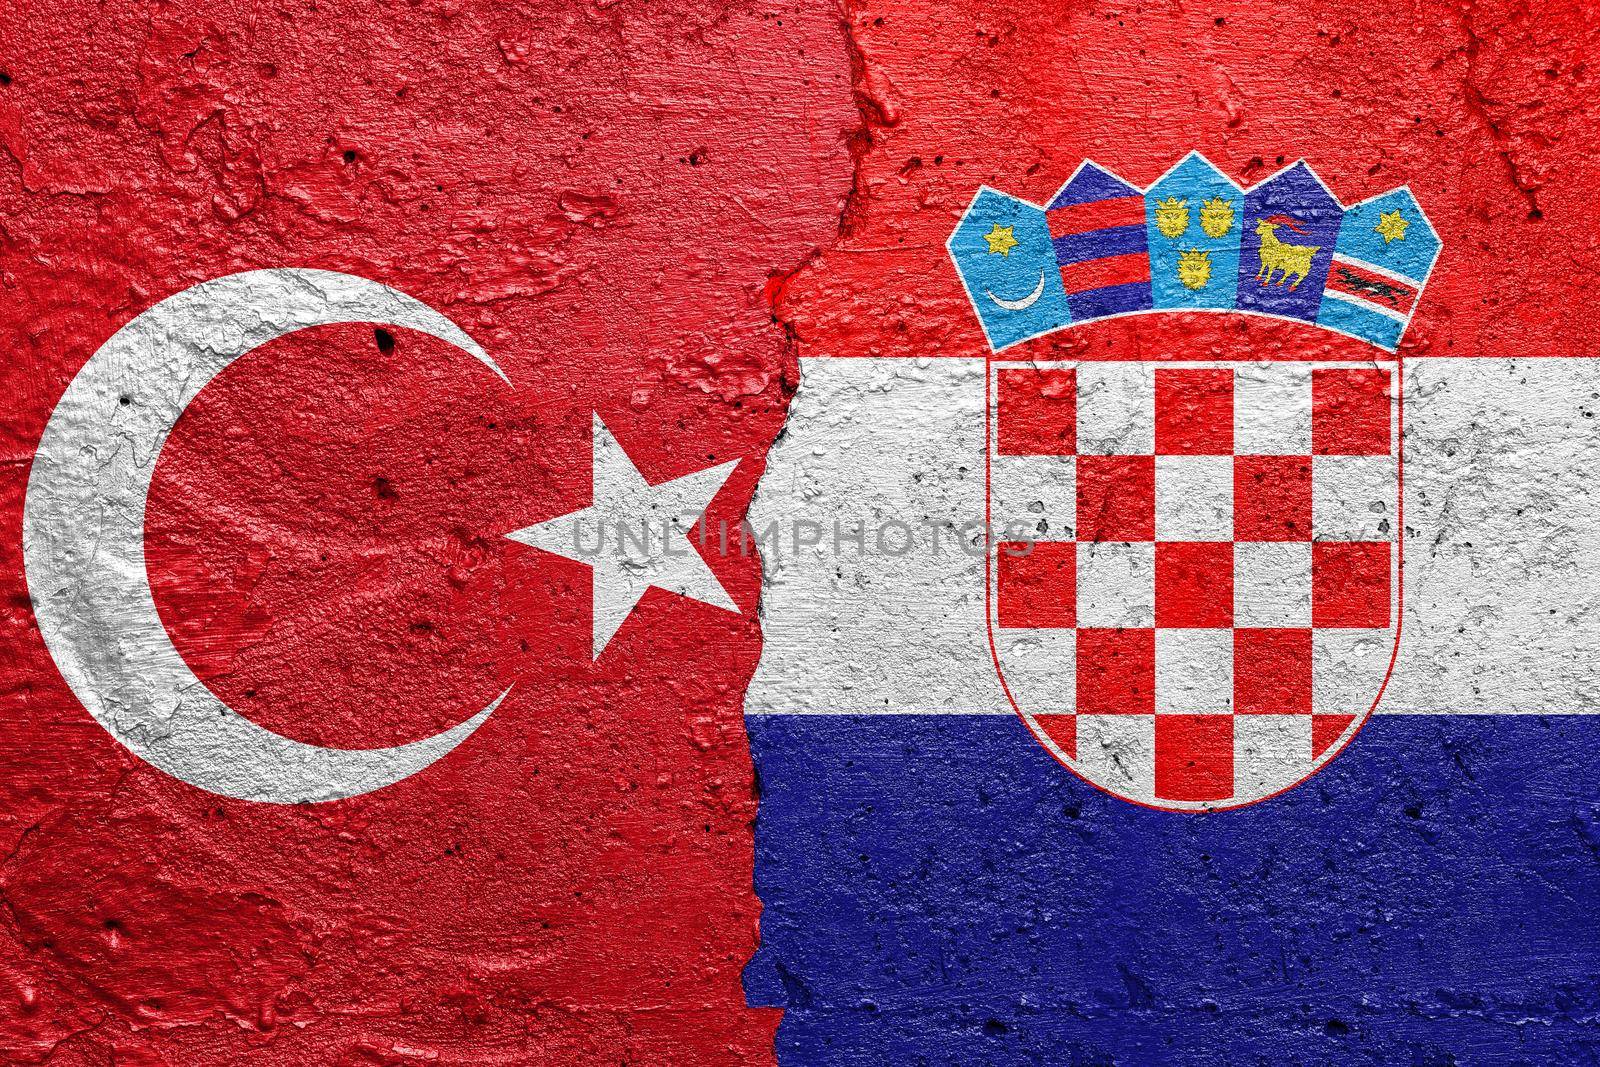 Turkey and Croatia - Cracked concrete wall painted with a Turkish flag on the left and a Croatian flag on the right stock photo by adamr